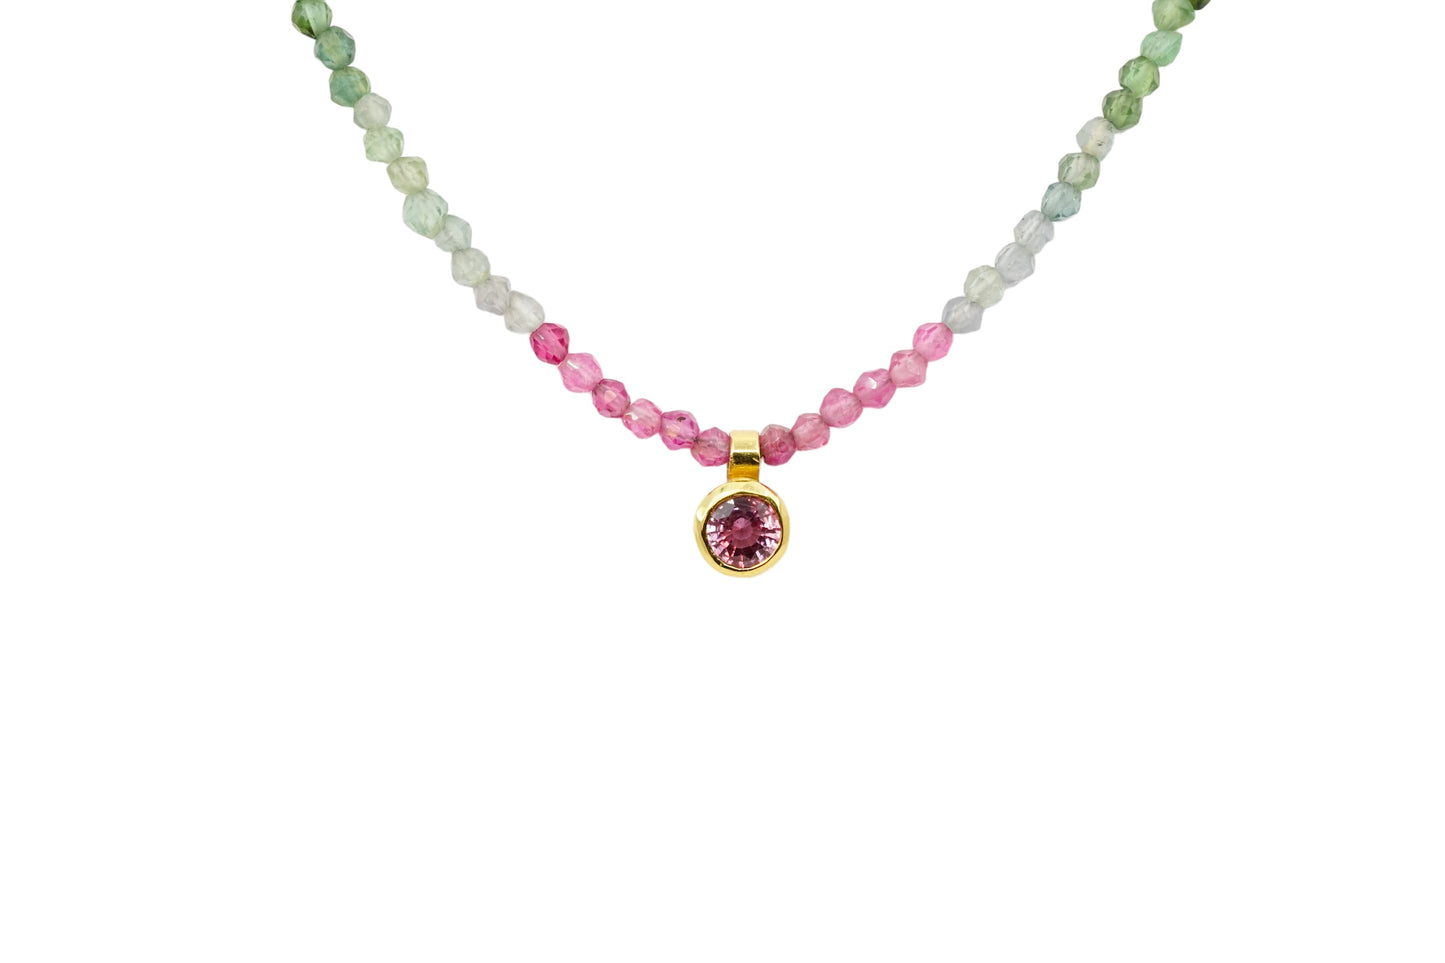 Beaded Tourmaline and Sapphire Pink and Green Necklace